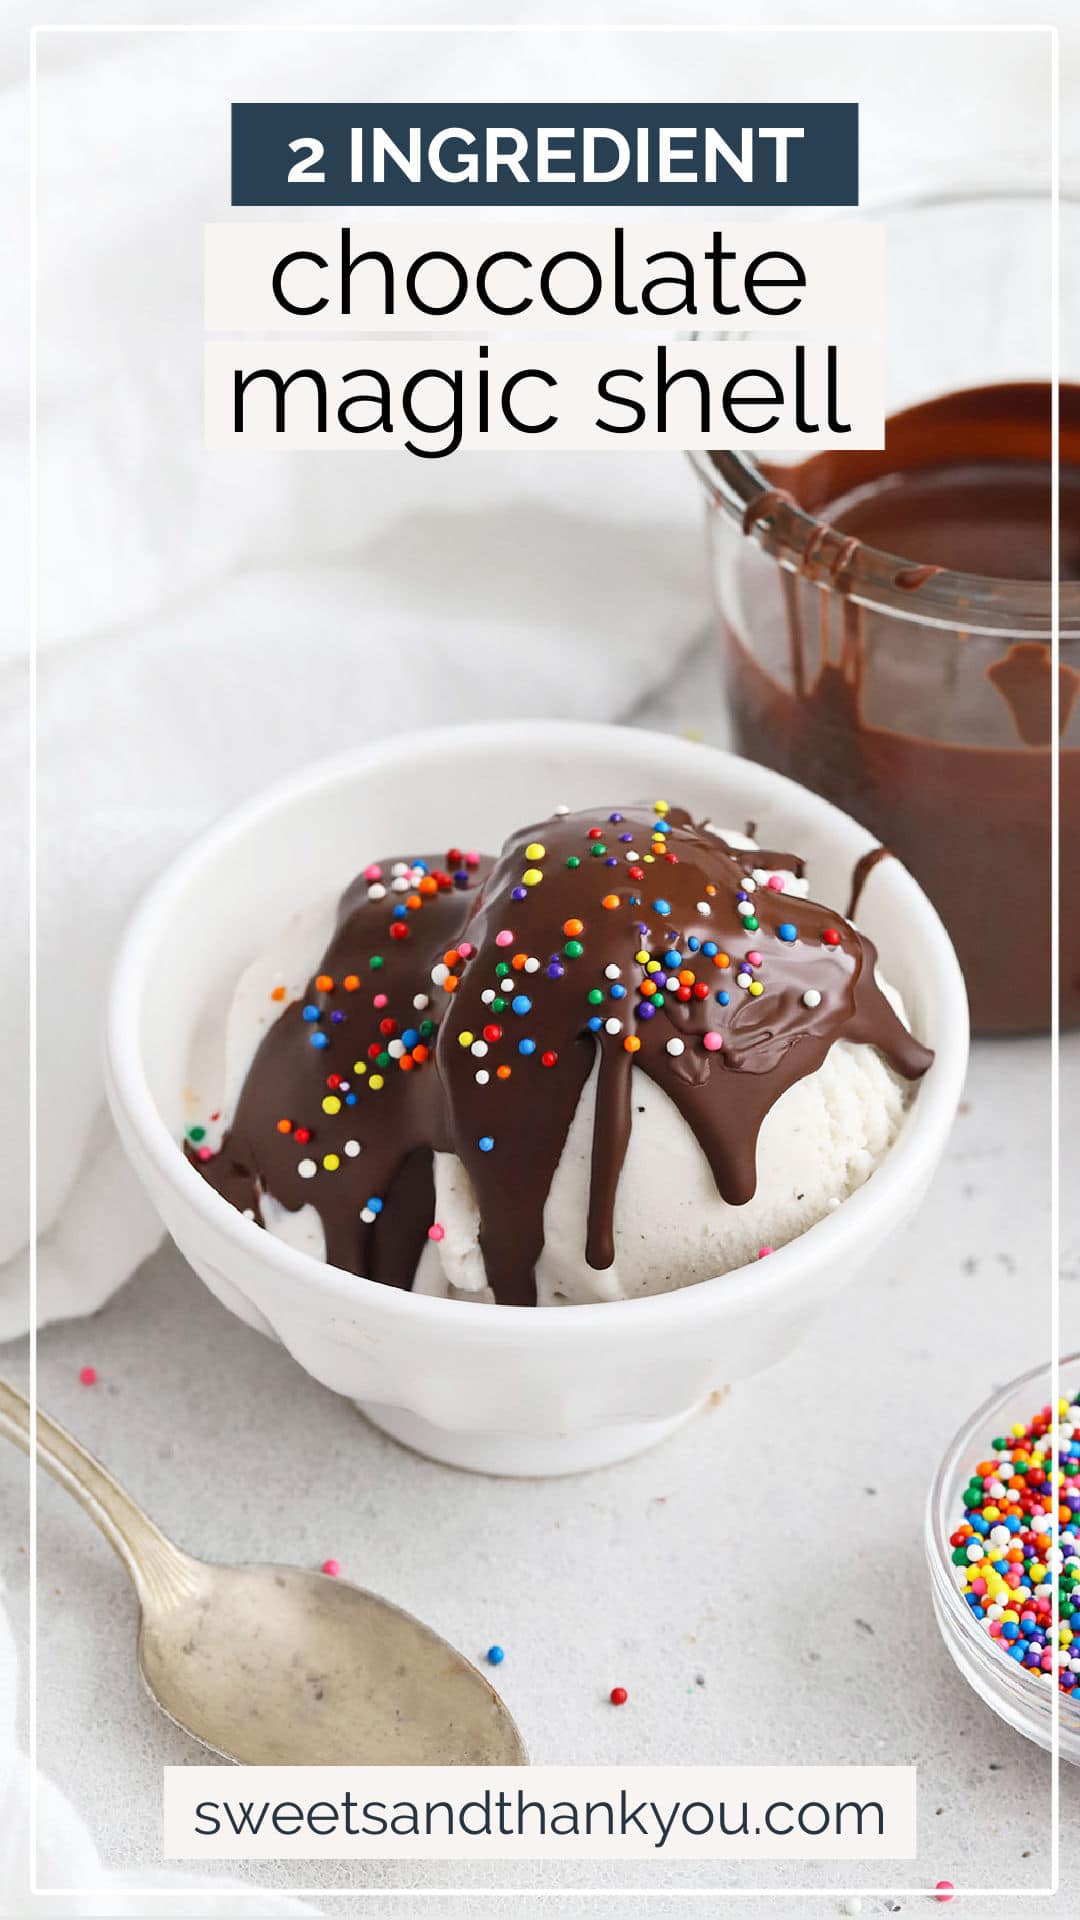 Easy 2-Ingredient Chocolate Shell For Ice Cream - This homemade magic shell topping recipe adds a perfect chocolatey crunch to your favorite scoop of ice cream! // Homemade chocolate magic shell // healthy magic shell // vegan magic shell // vegan chocolate shell // healthy chocolate shell // homemade magic shell for ice cream // Chocolate sauce for ice cream // ice cream chocolate sauce #chocolateshell #magicshell #chocolatesauce #vegan #glutenfree #icecream #icecreamtoppings #dairyfree